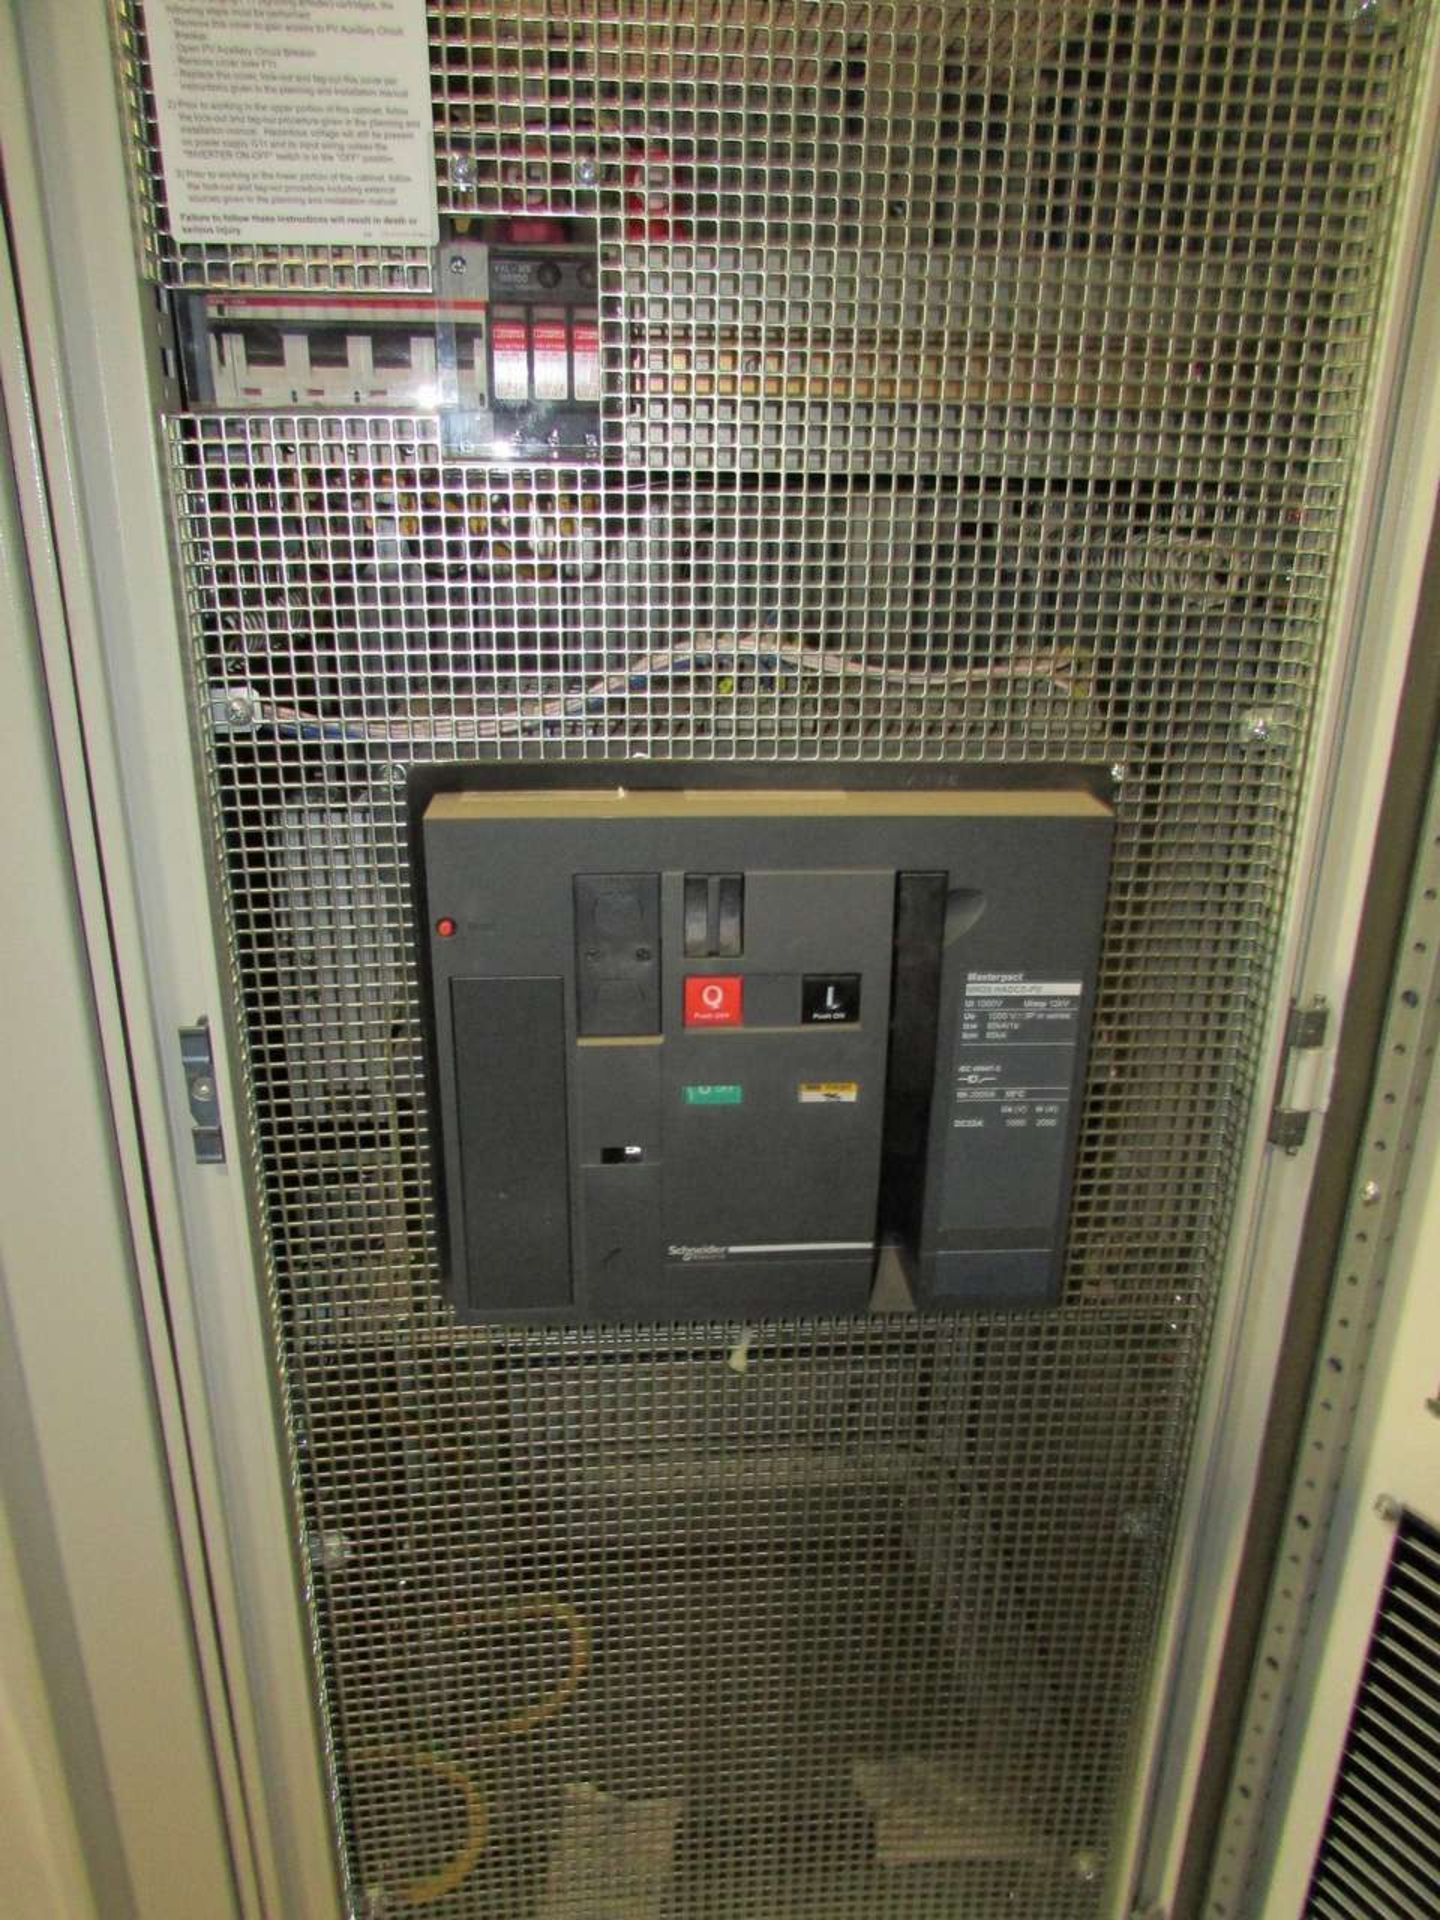 Schneider Electric Context Core XC630 Grid Tie Photovoltaic Inverter Cabinet - Image 16 of 17